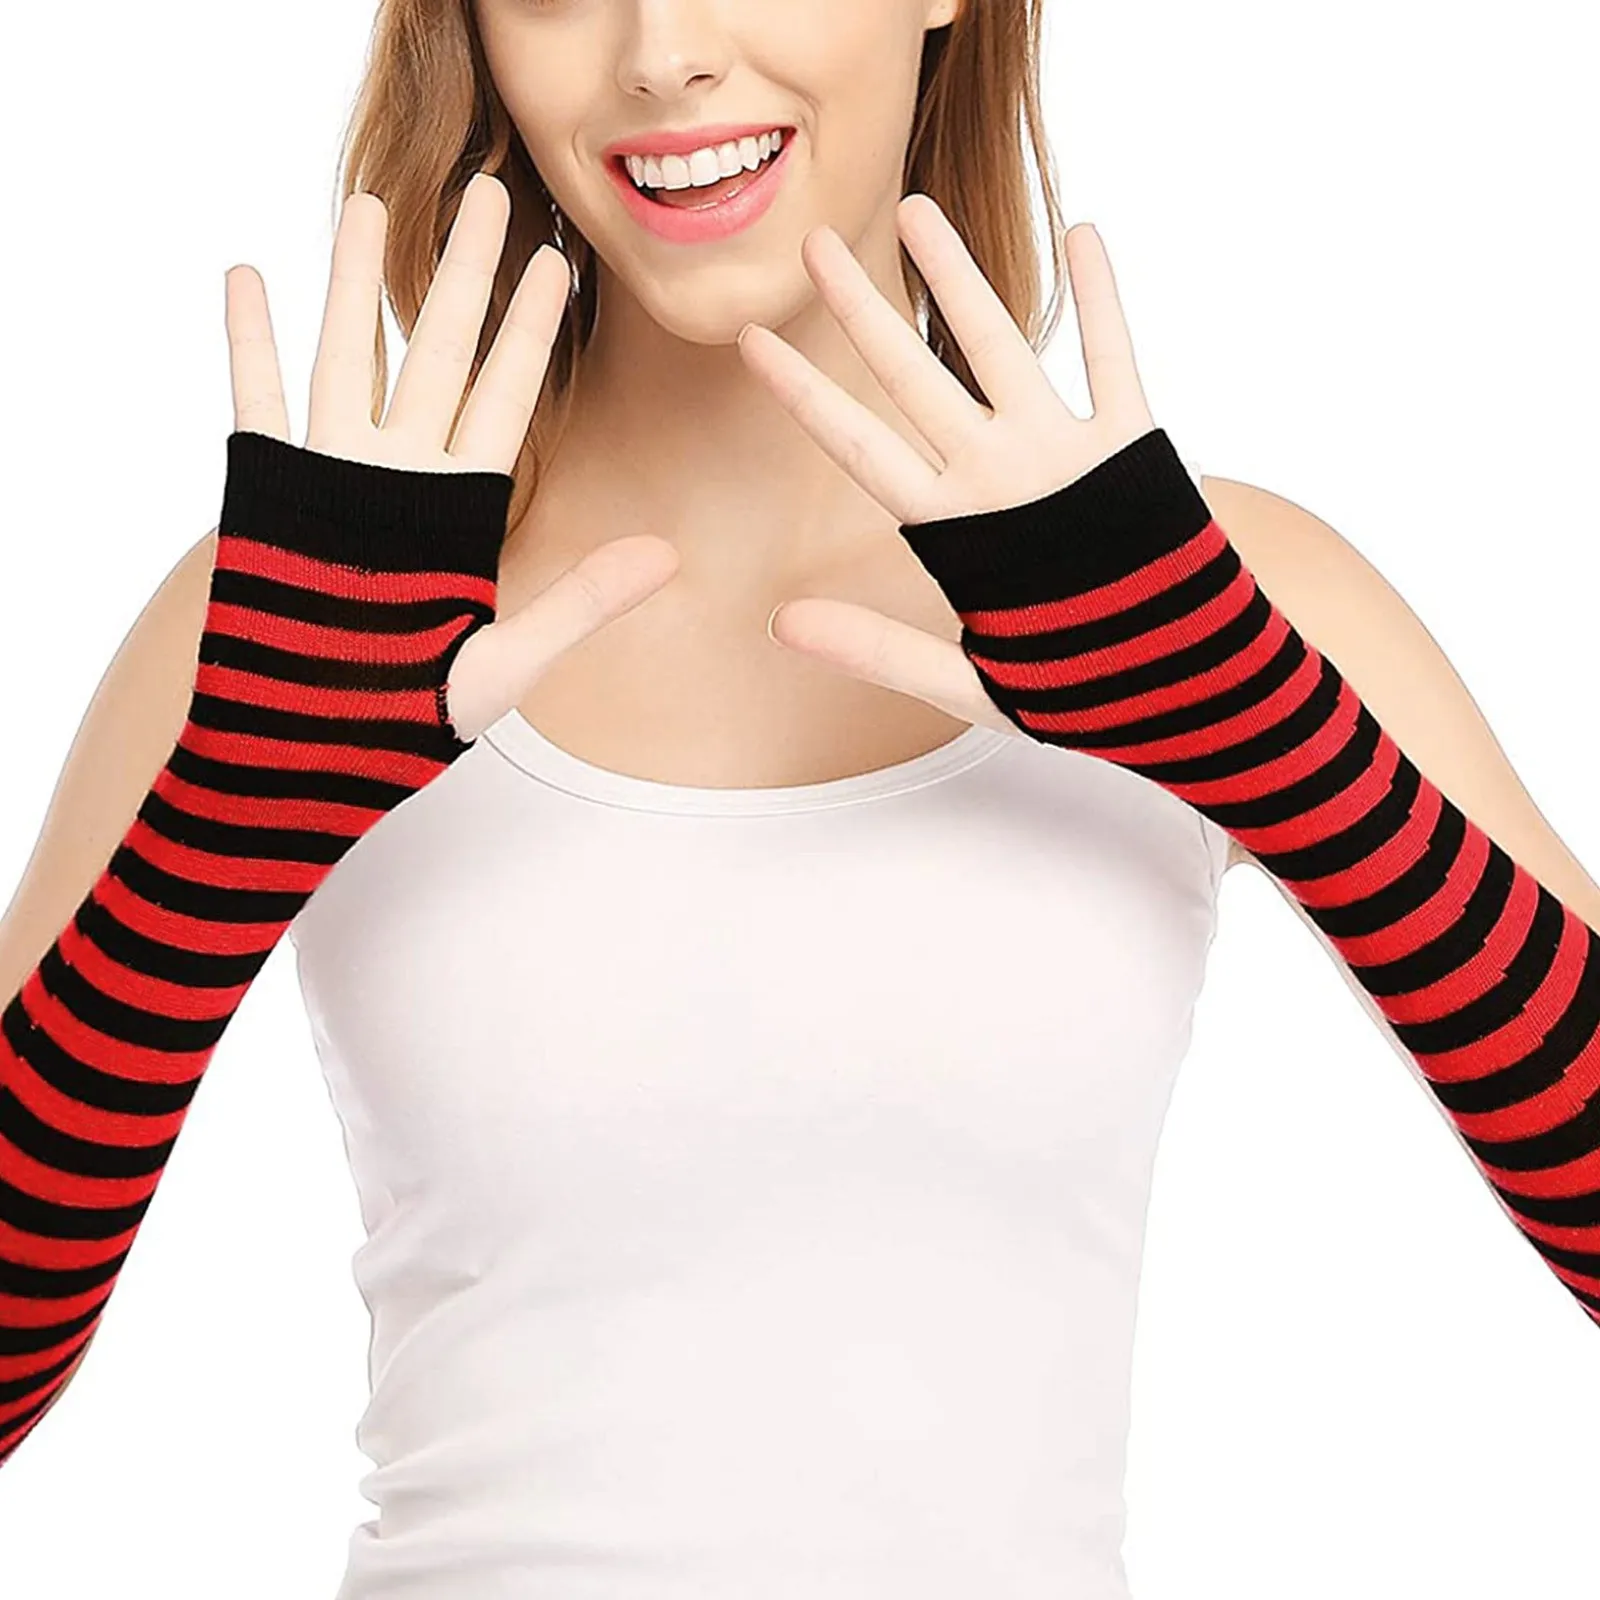 YiZYiF Womens Long Fingerless Gloves Knitted Arm Warmers Punk Rock Striped Elbow Gloves Thumb Hole Stretchy Gloves Mittens 